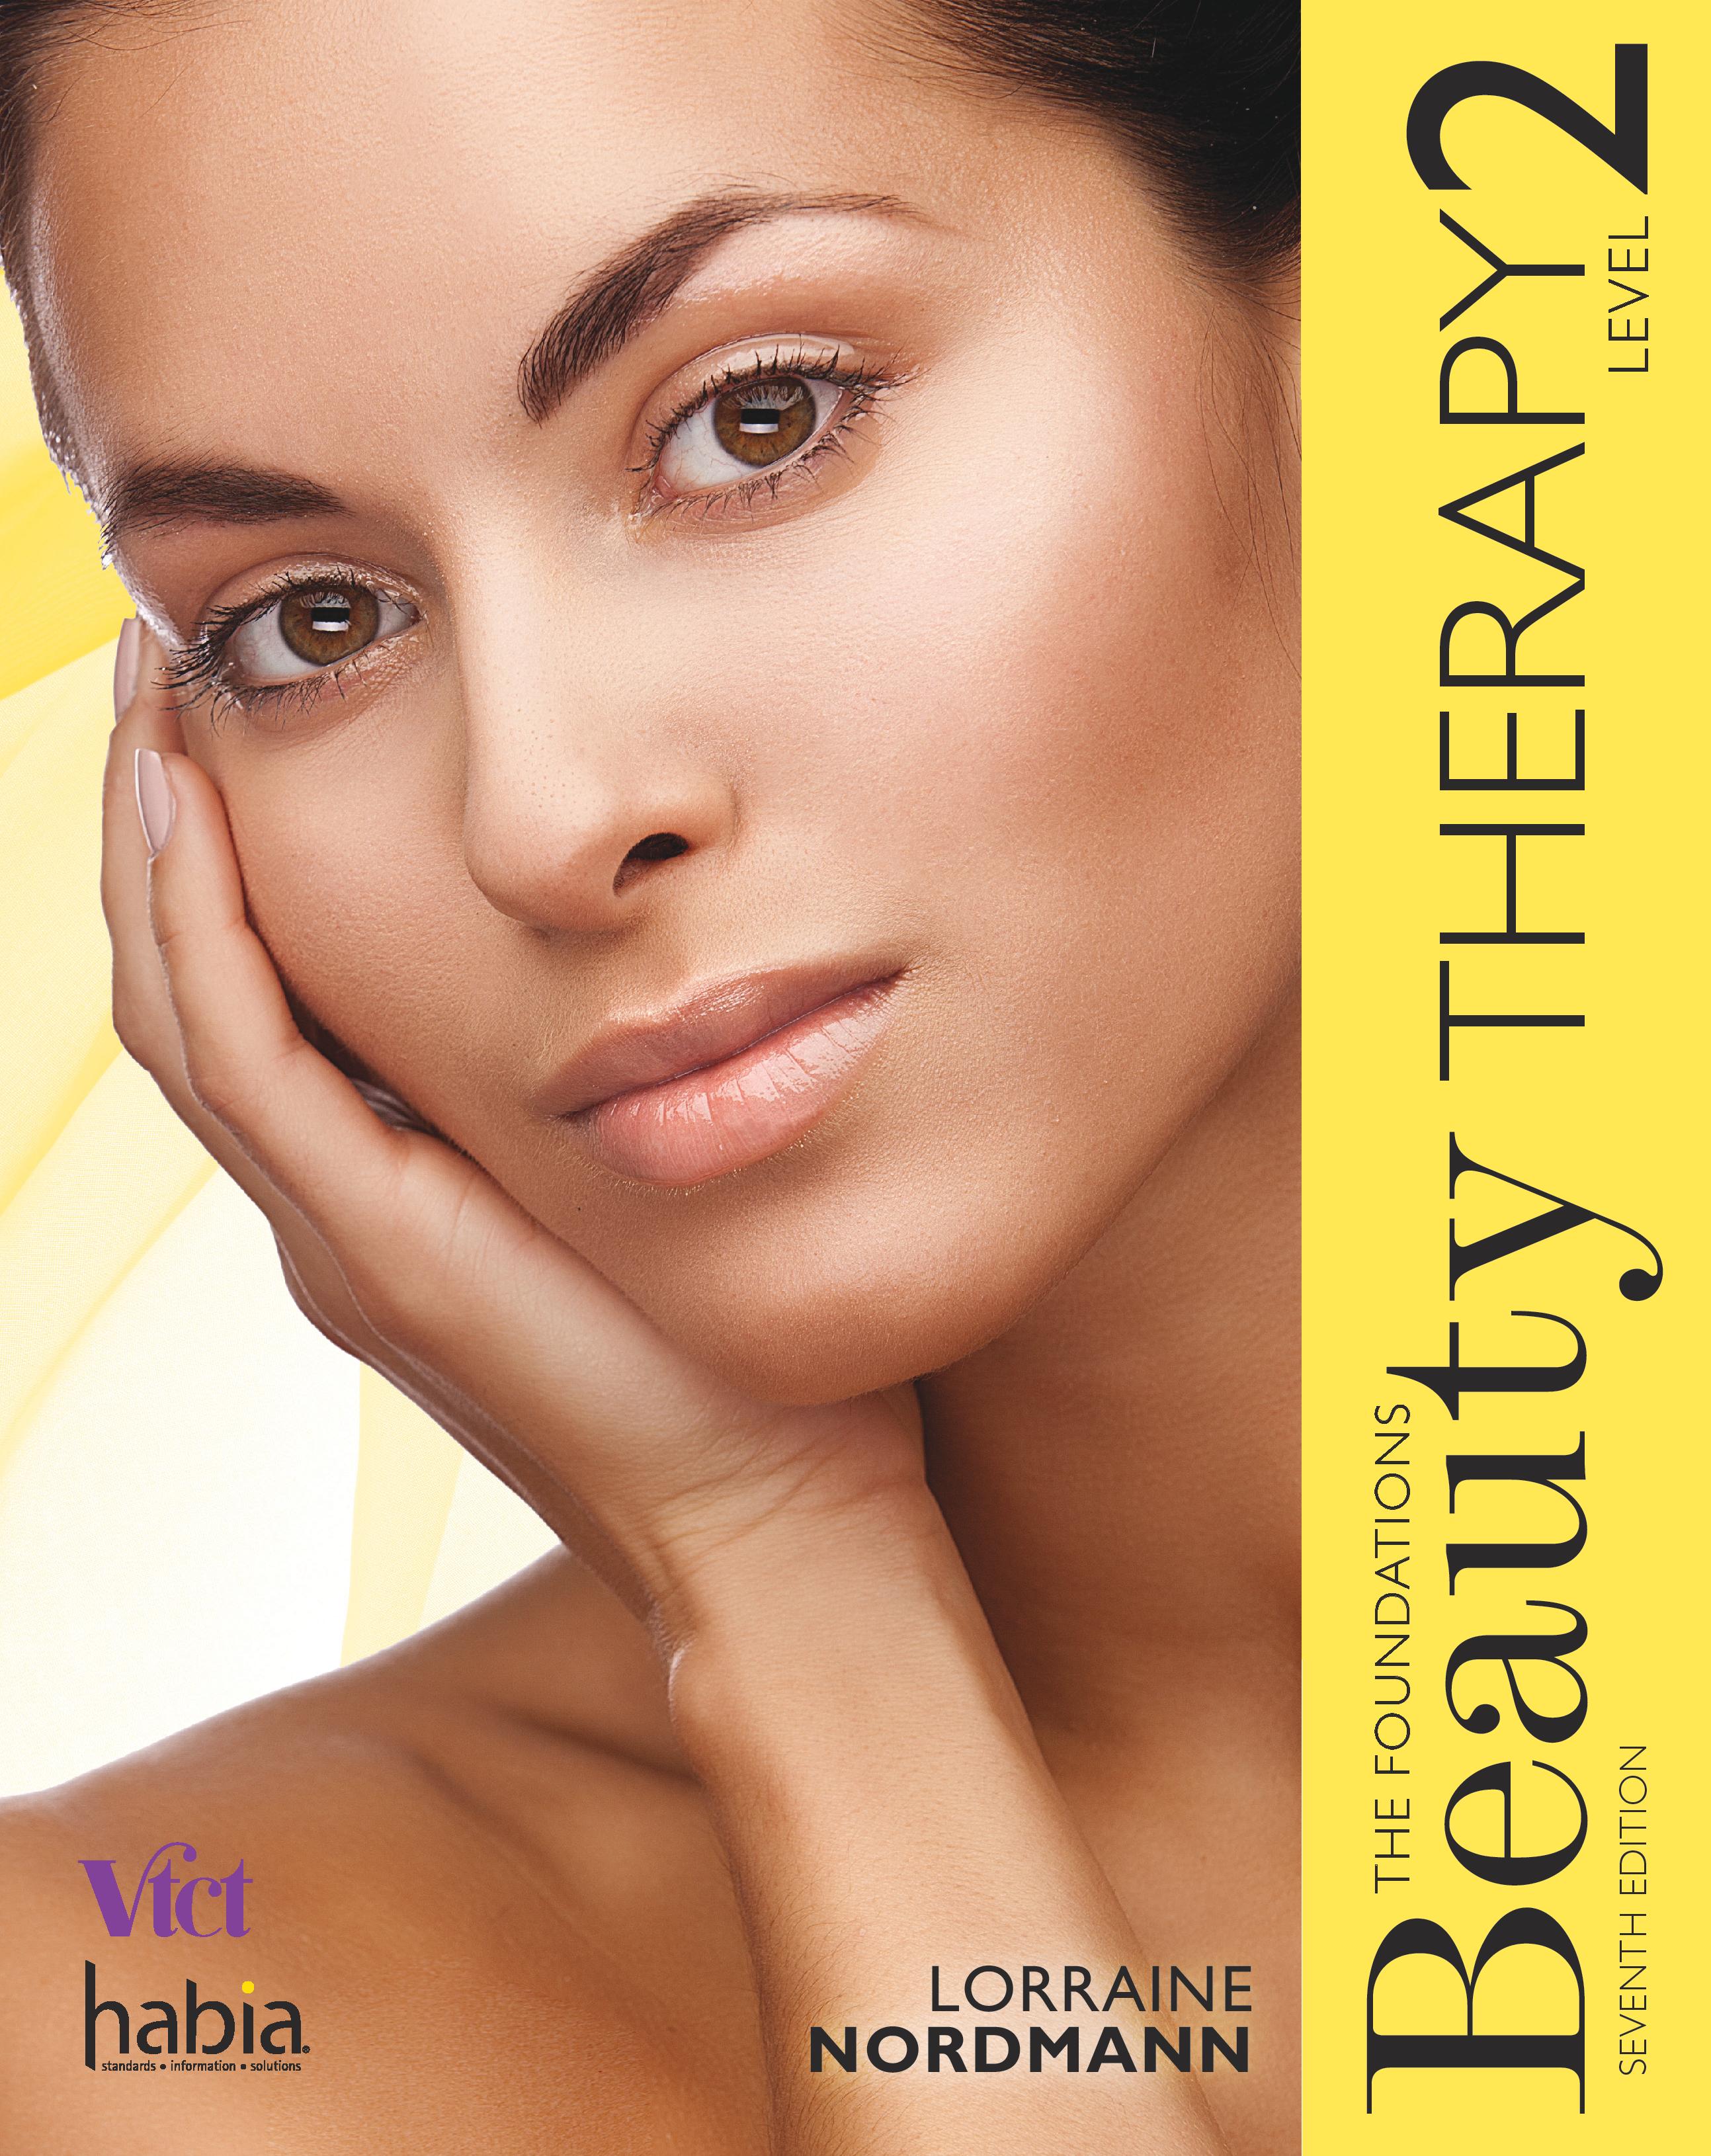 Professional Beauty Therapy Level 3, 5th edition by Lorraine Nordmann